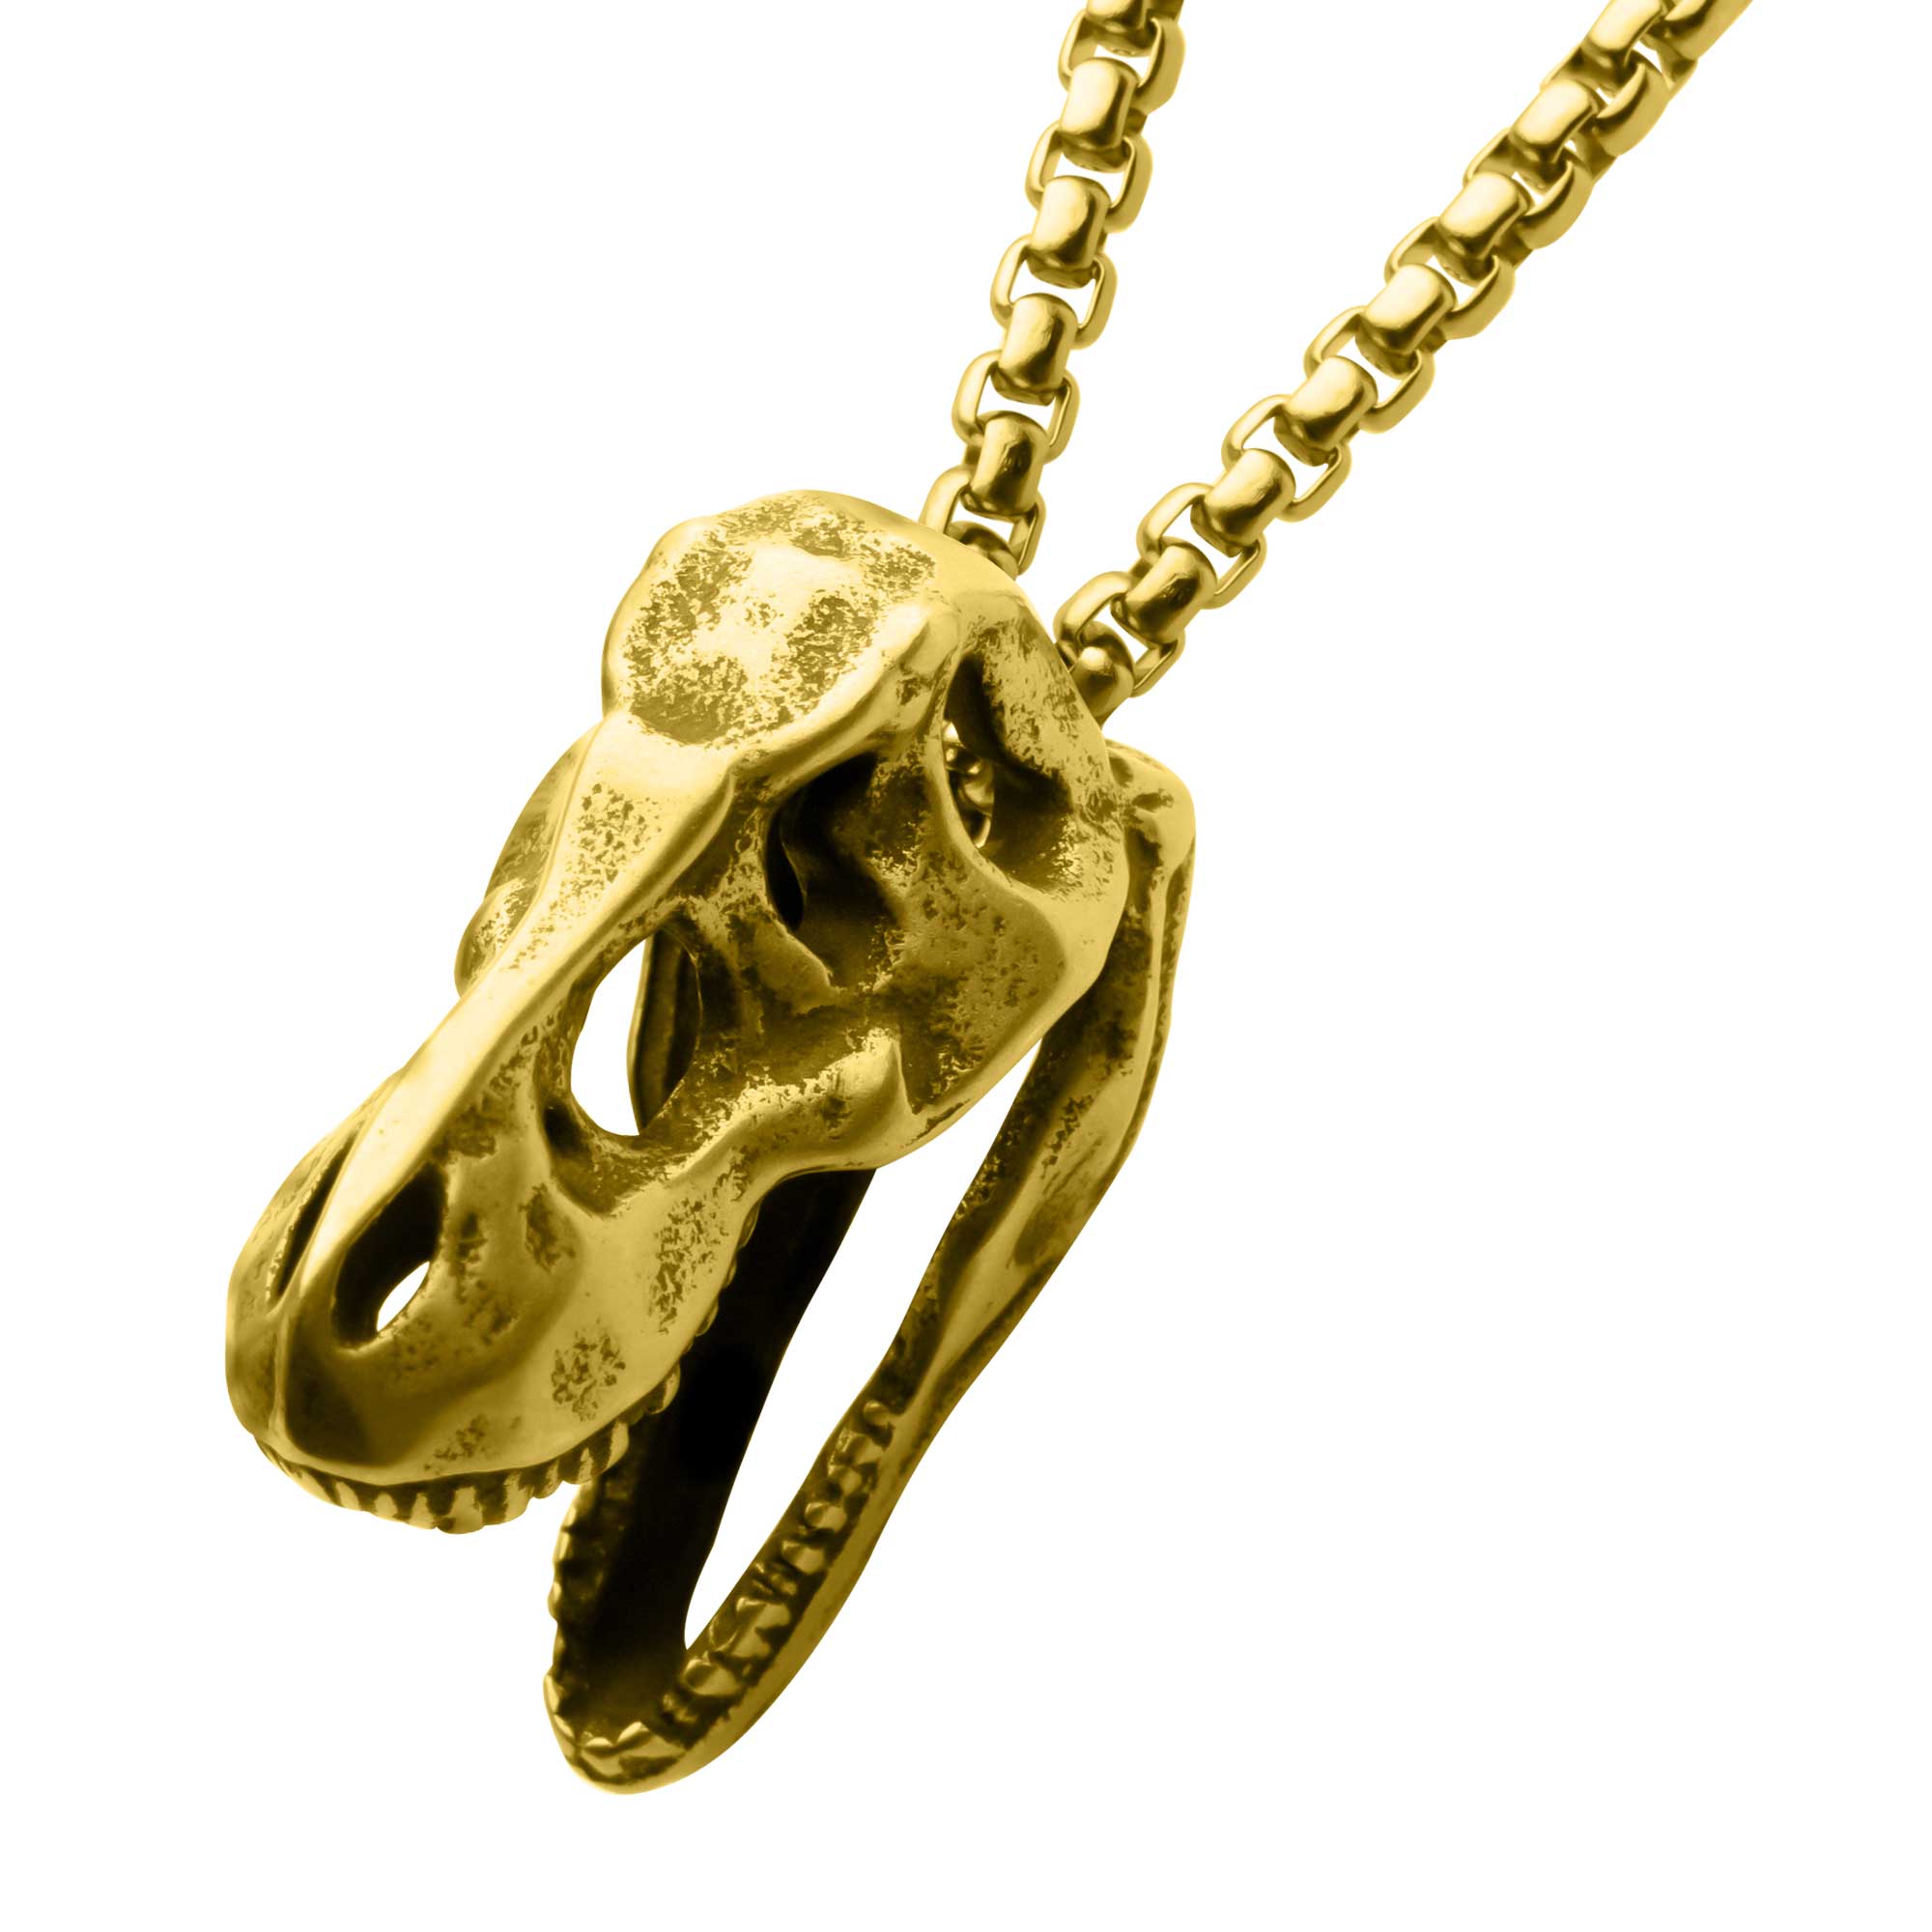 Distressed Matte 18Kt Gold IP T-Rex Skull Pendant with Chain Morin Jewelers Southbridge, MA